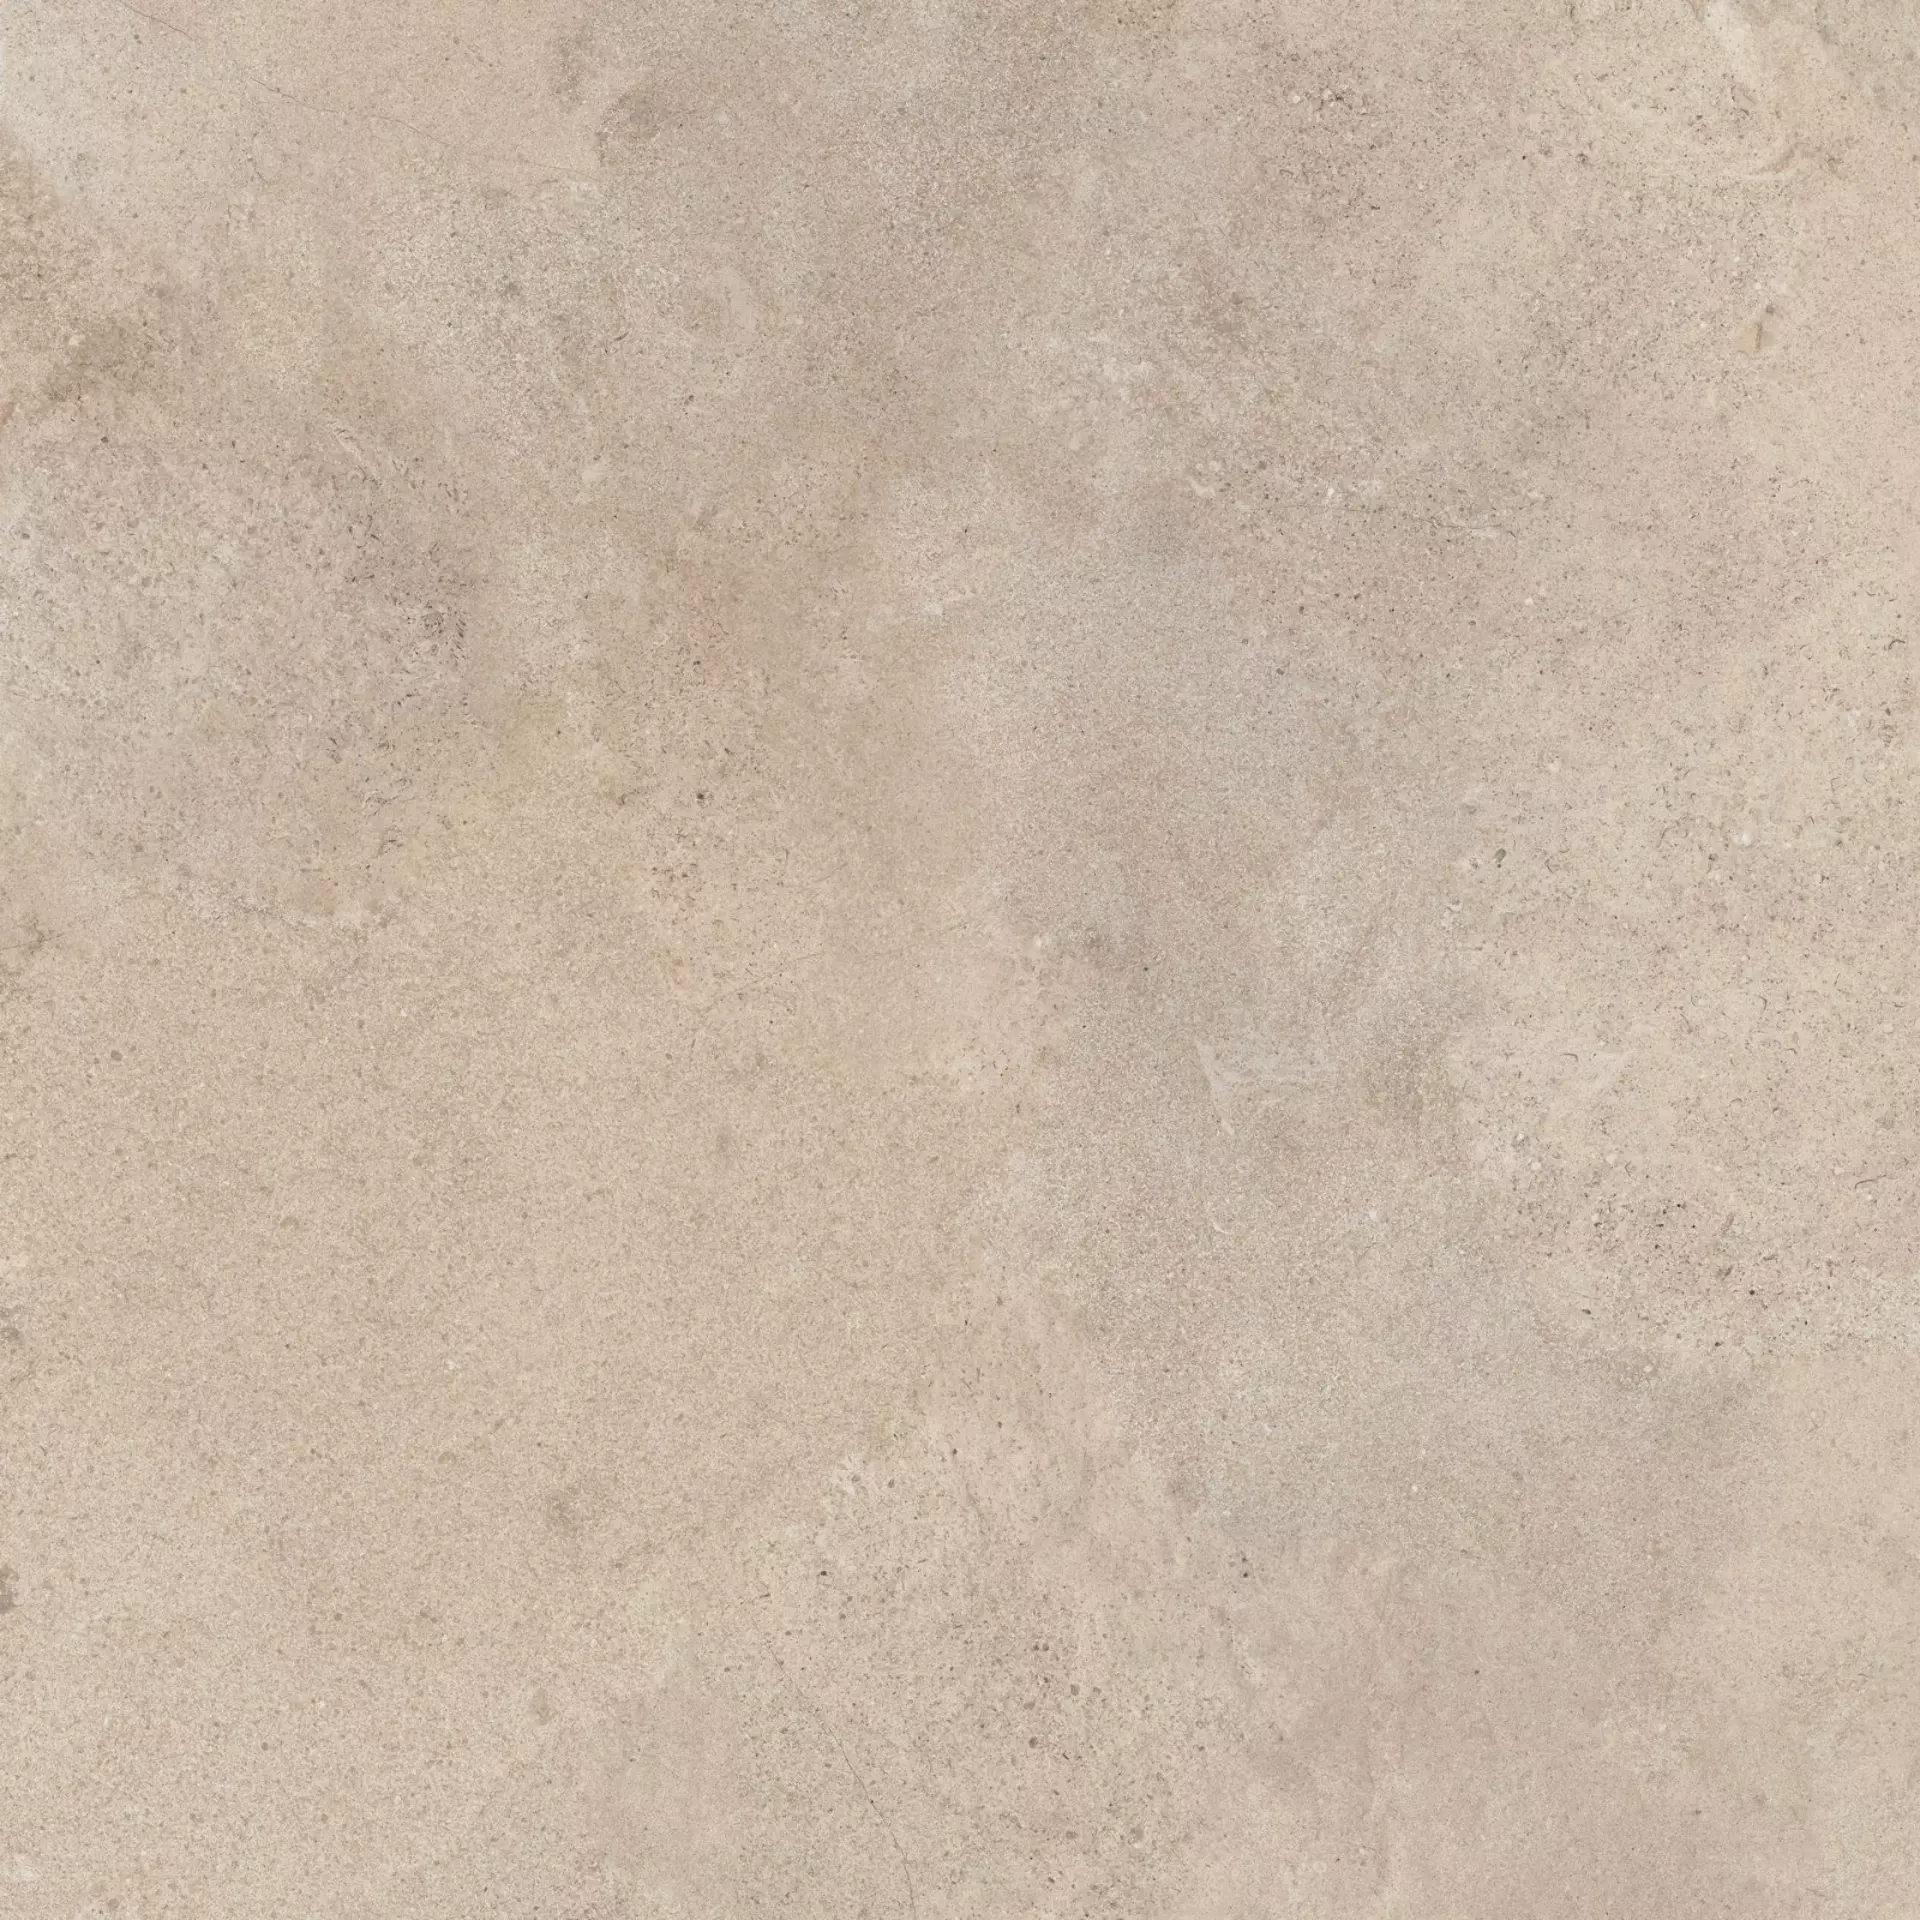 ABK Alpes Wide Sand Naturale PF60000210 80x80cm rectified 8,5mm